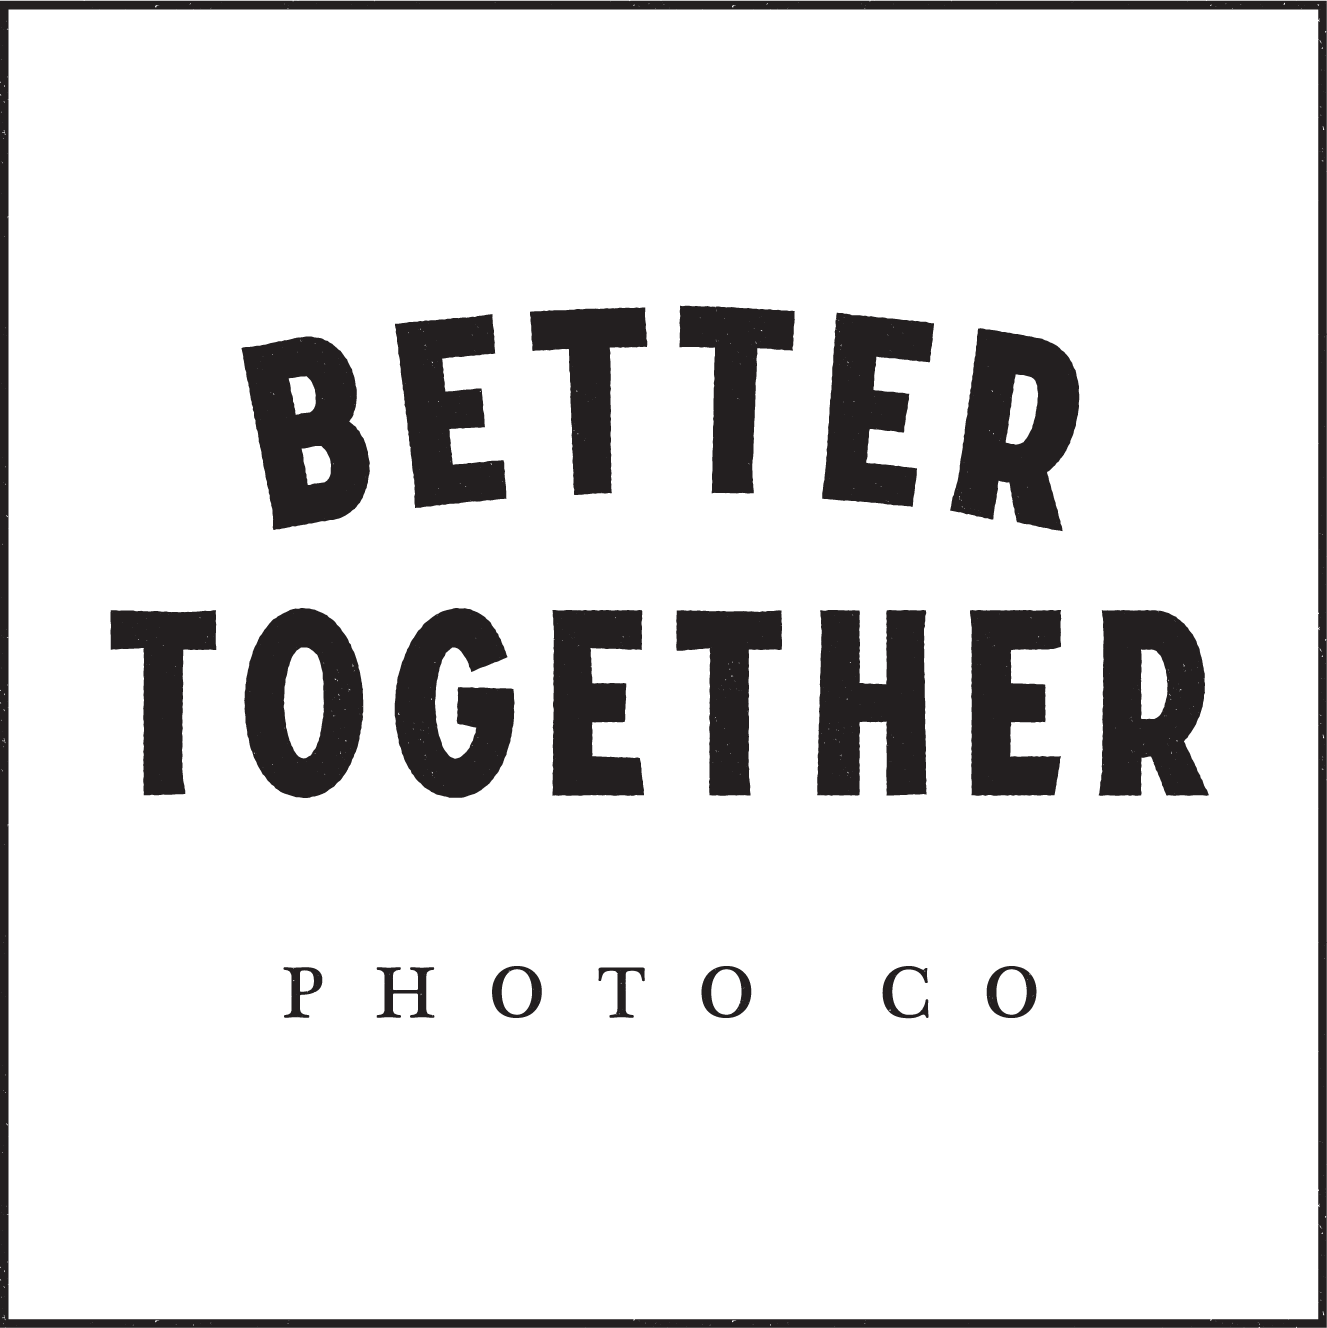 Much better together. Better together кафе. Надпись better together из пластика. Better together перевод на русский. Better together.